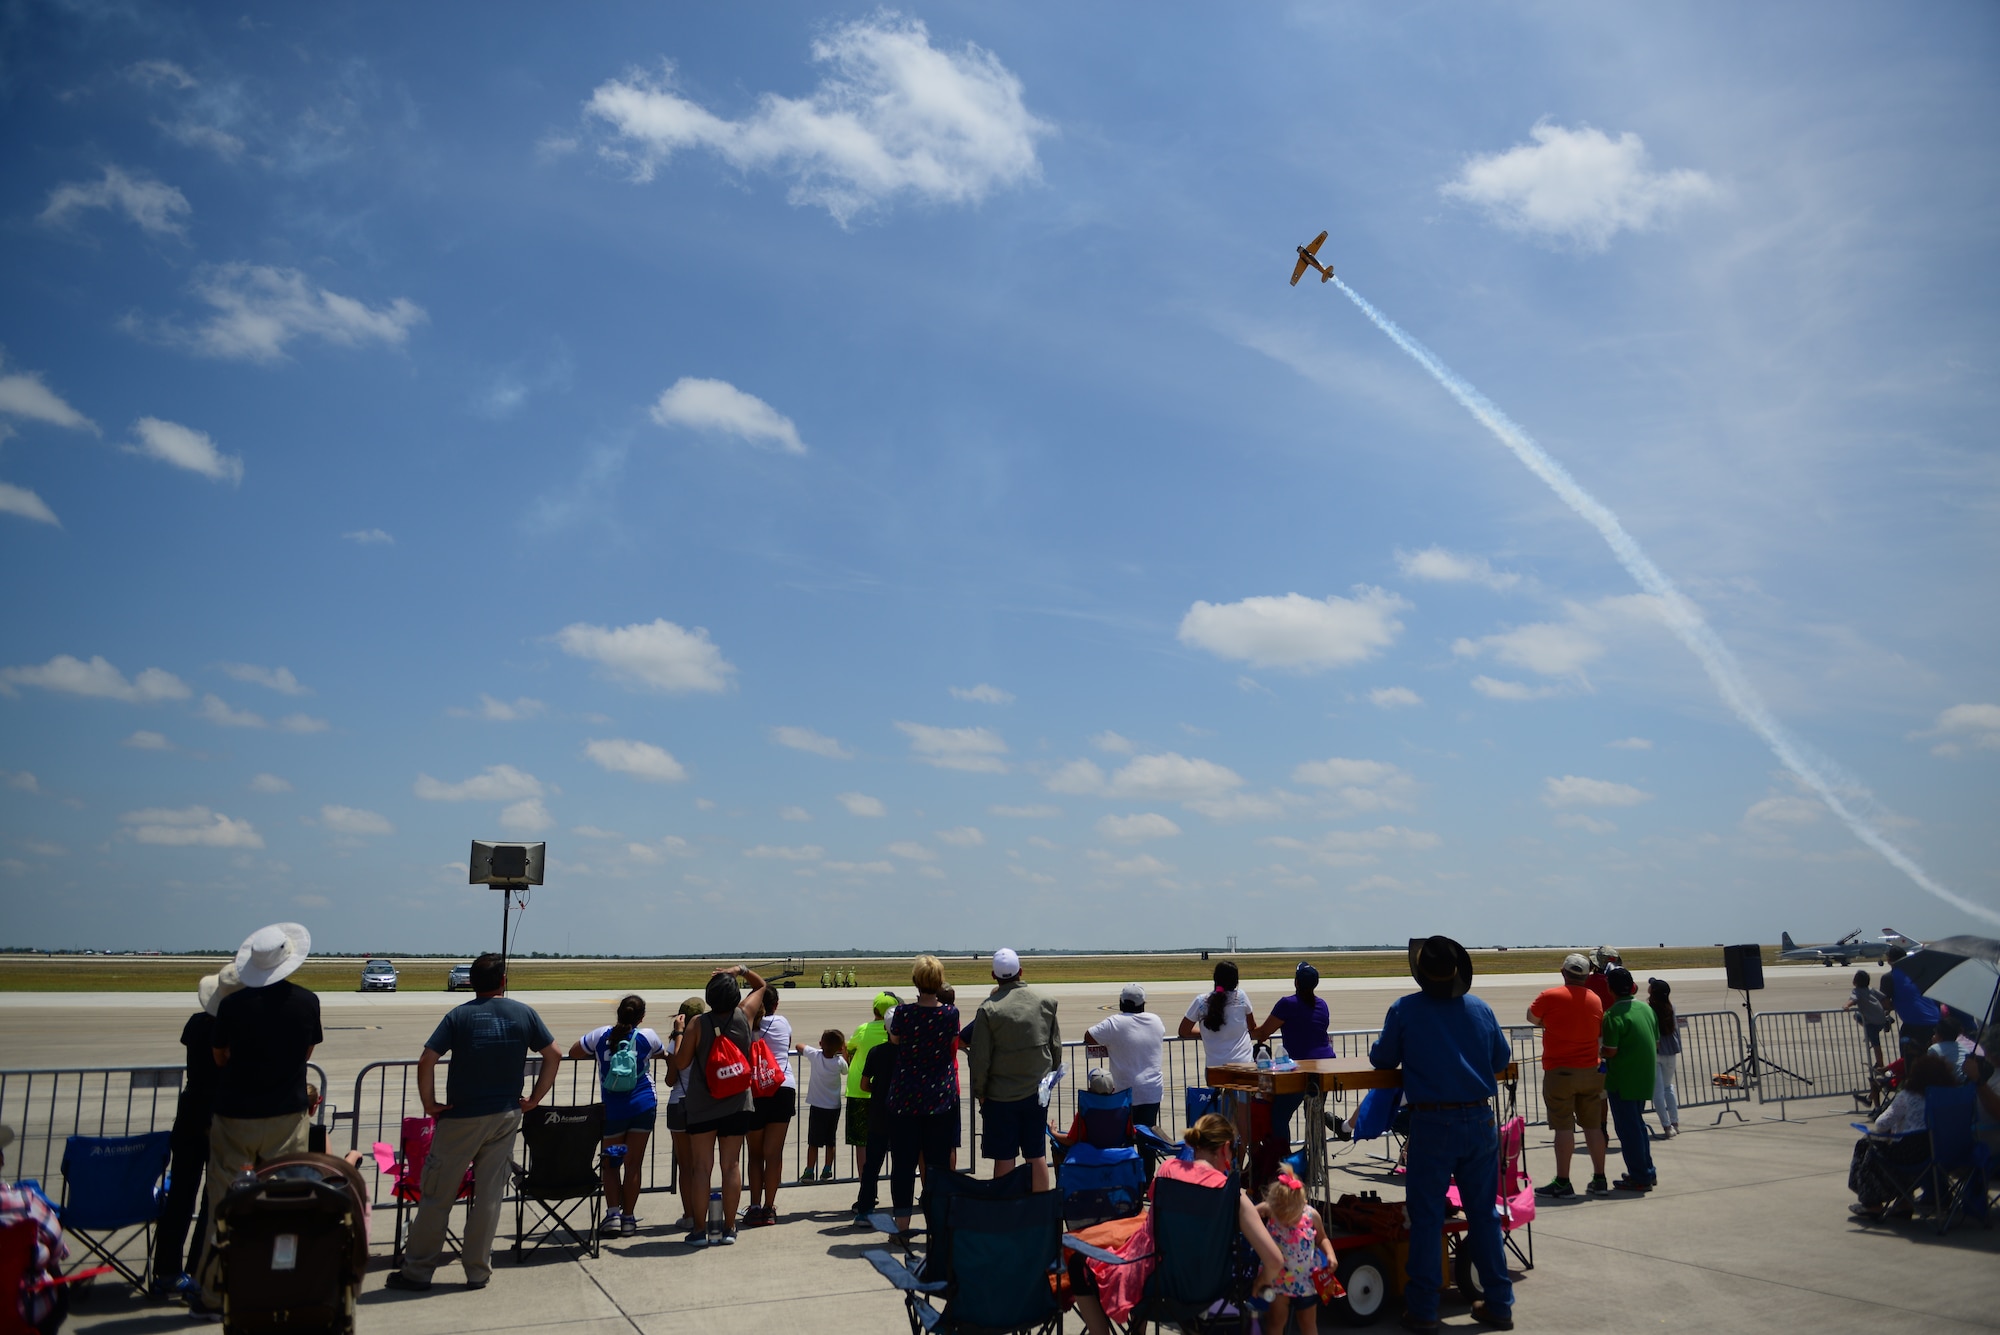 Attendees of Laughlin Air Force Base’s open house and airshow, “Fiesta of Flight,” watch as a performer navigates the Texas skies, May 12, 2018. With more than 20,000 people in attendance, aircraft from various generations displayed their aerial capabilities. (U.S. Air Force photo by Senior Airman Benjamin N. Valmoja)